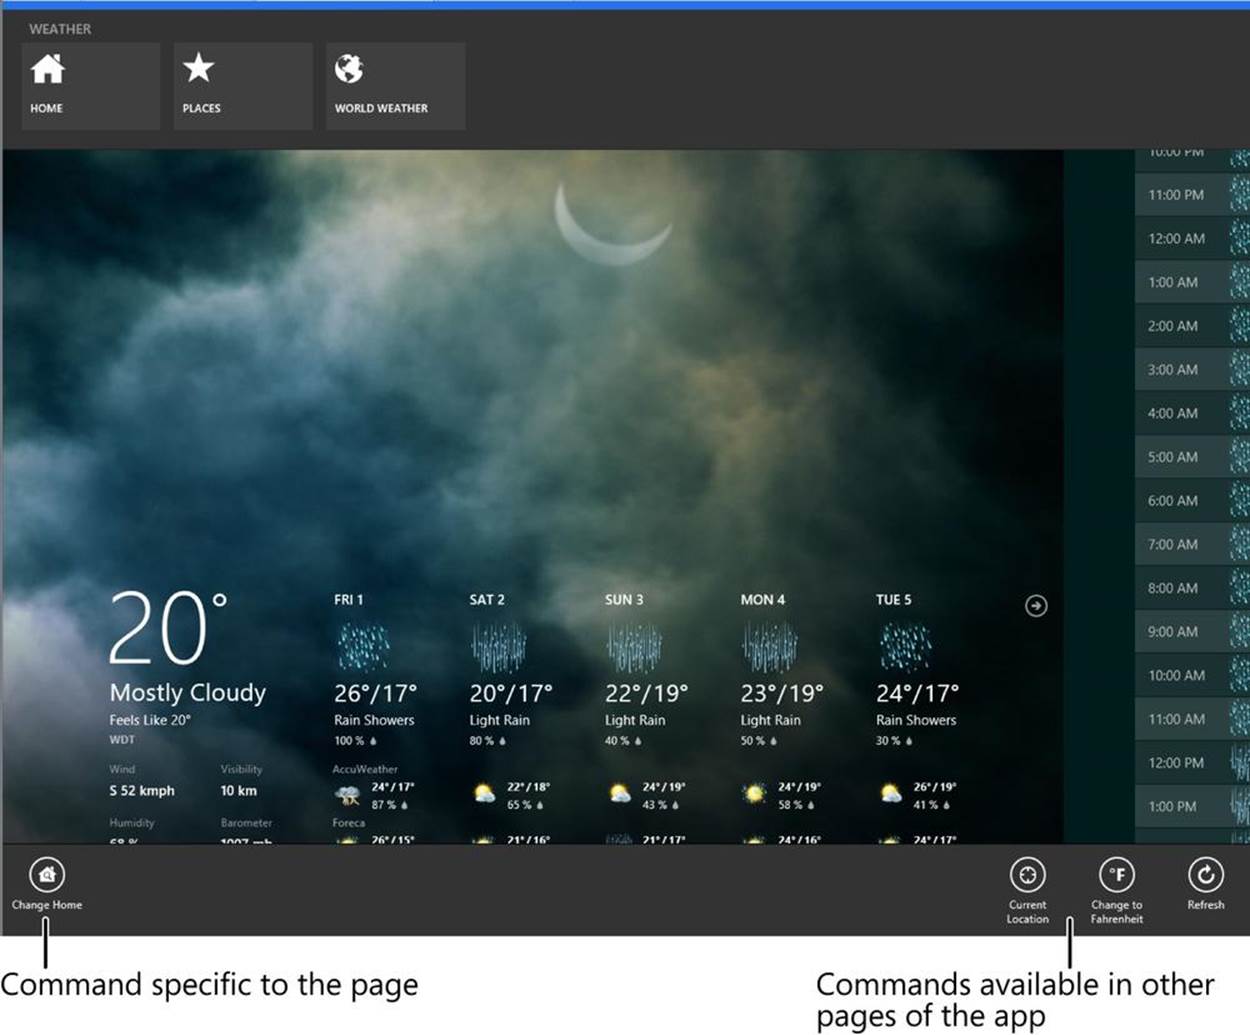 A screenshot of the Weather app showing content and two app bars. The top app bar contains the Home, Places, and World Weather commands. The bottom app bar contains a command on the left, Change Home, which is specific to the page. The Current Location, Change to Fahrenheit, and Refresh commands, which are available in other pages of the app, are located on the right side of the bottom app bar.